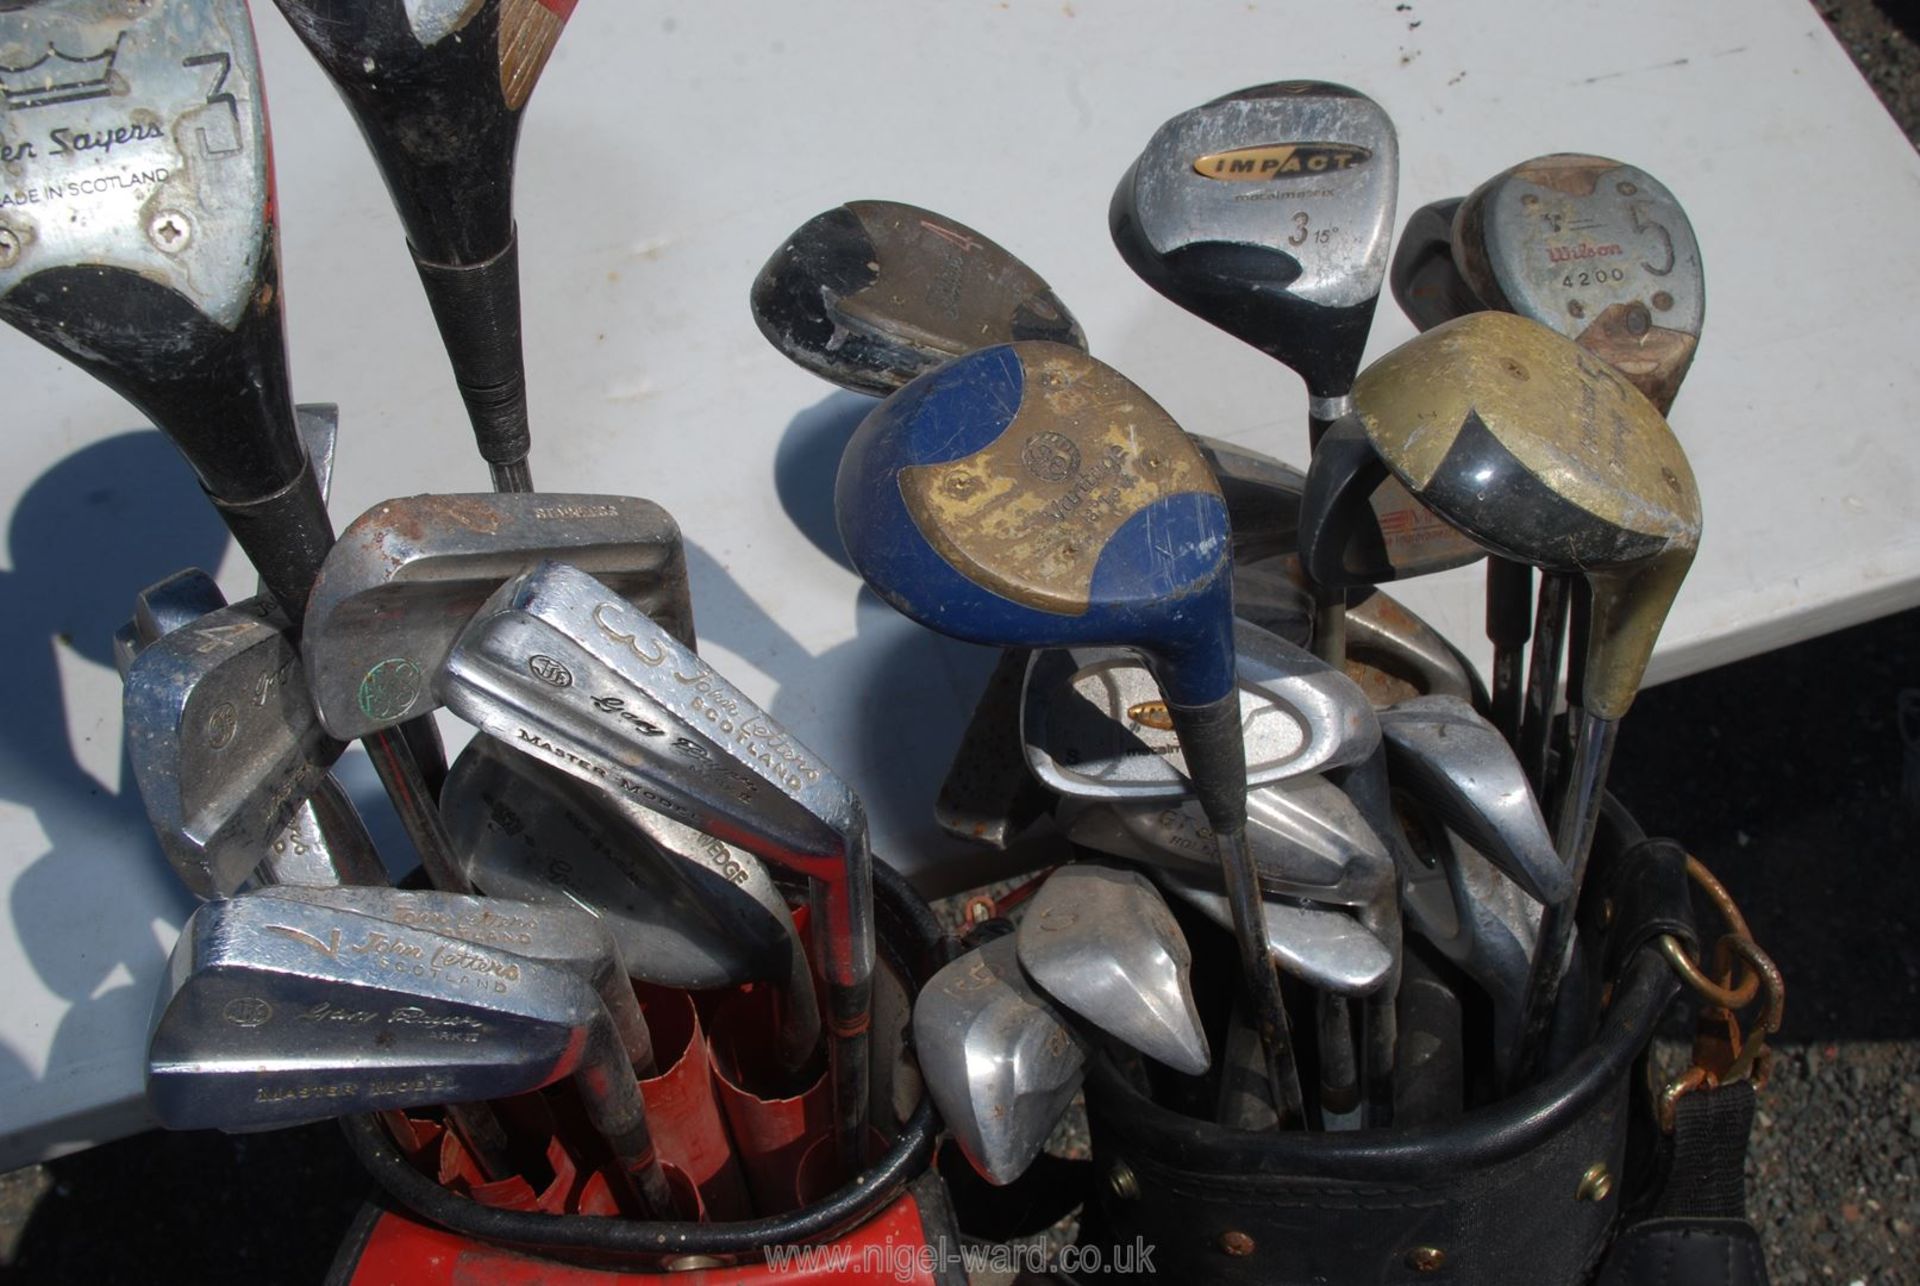 Two bags of golf clubs, Ben Sayers , John Letters. - Image 3 of 3